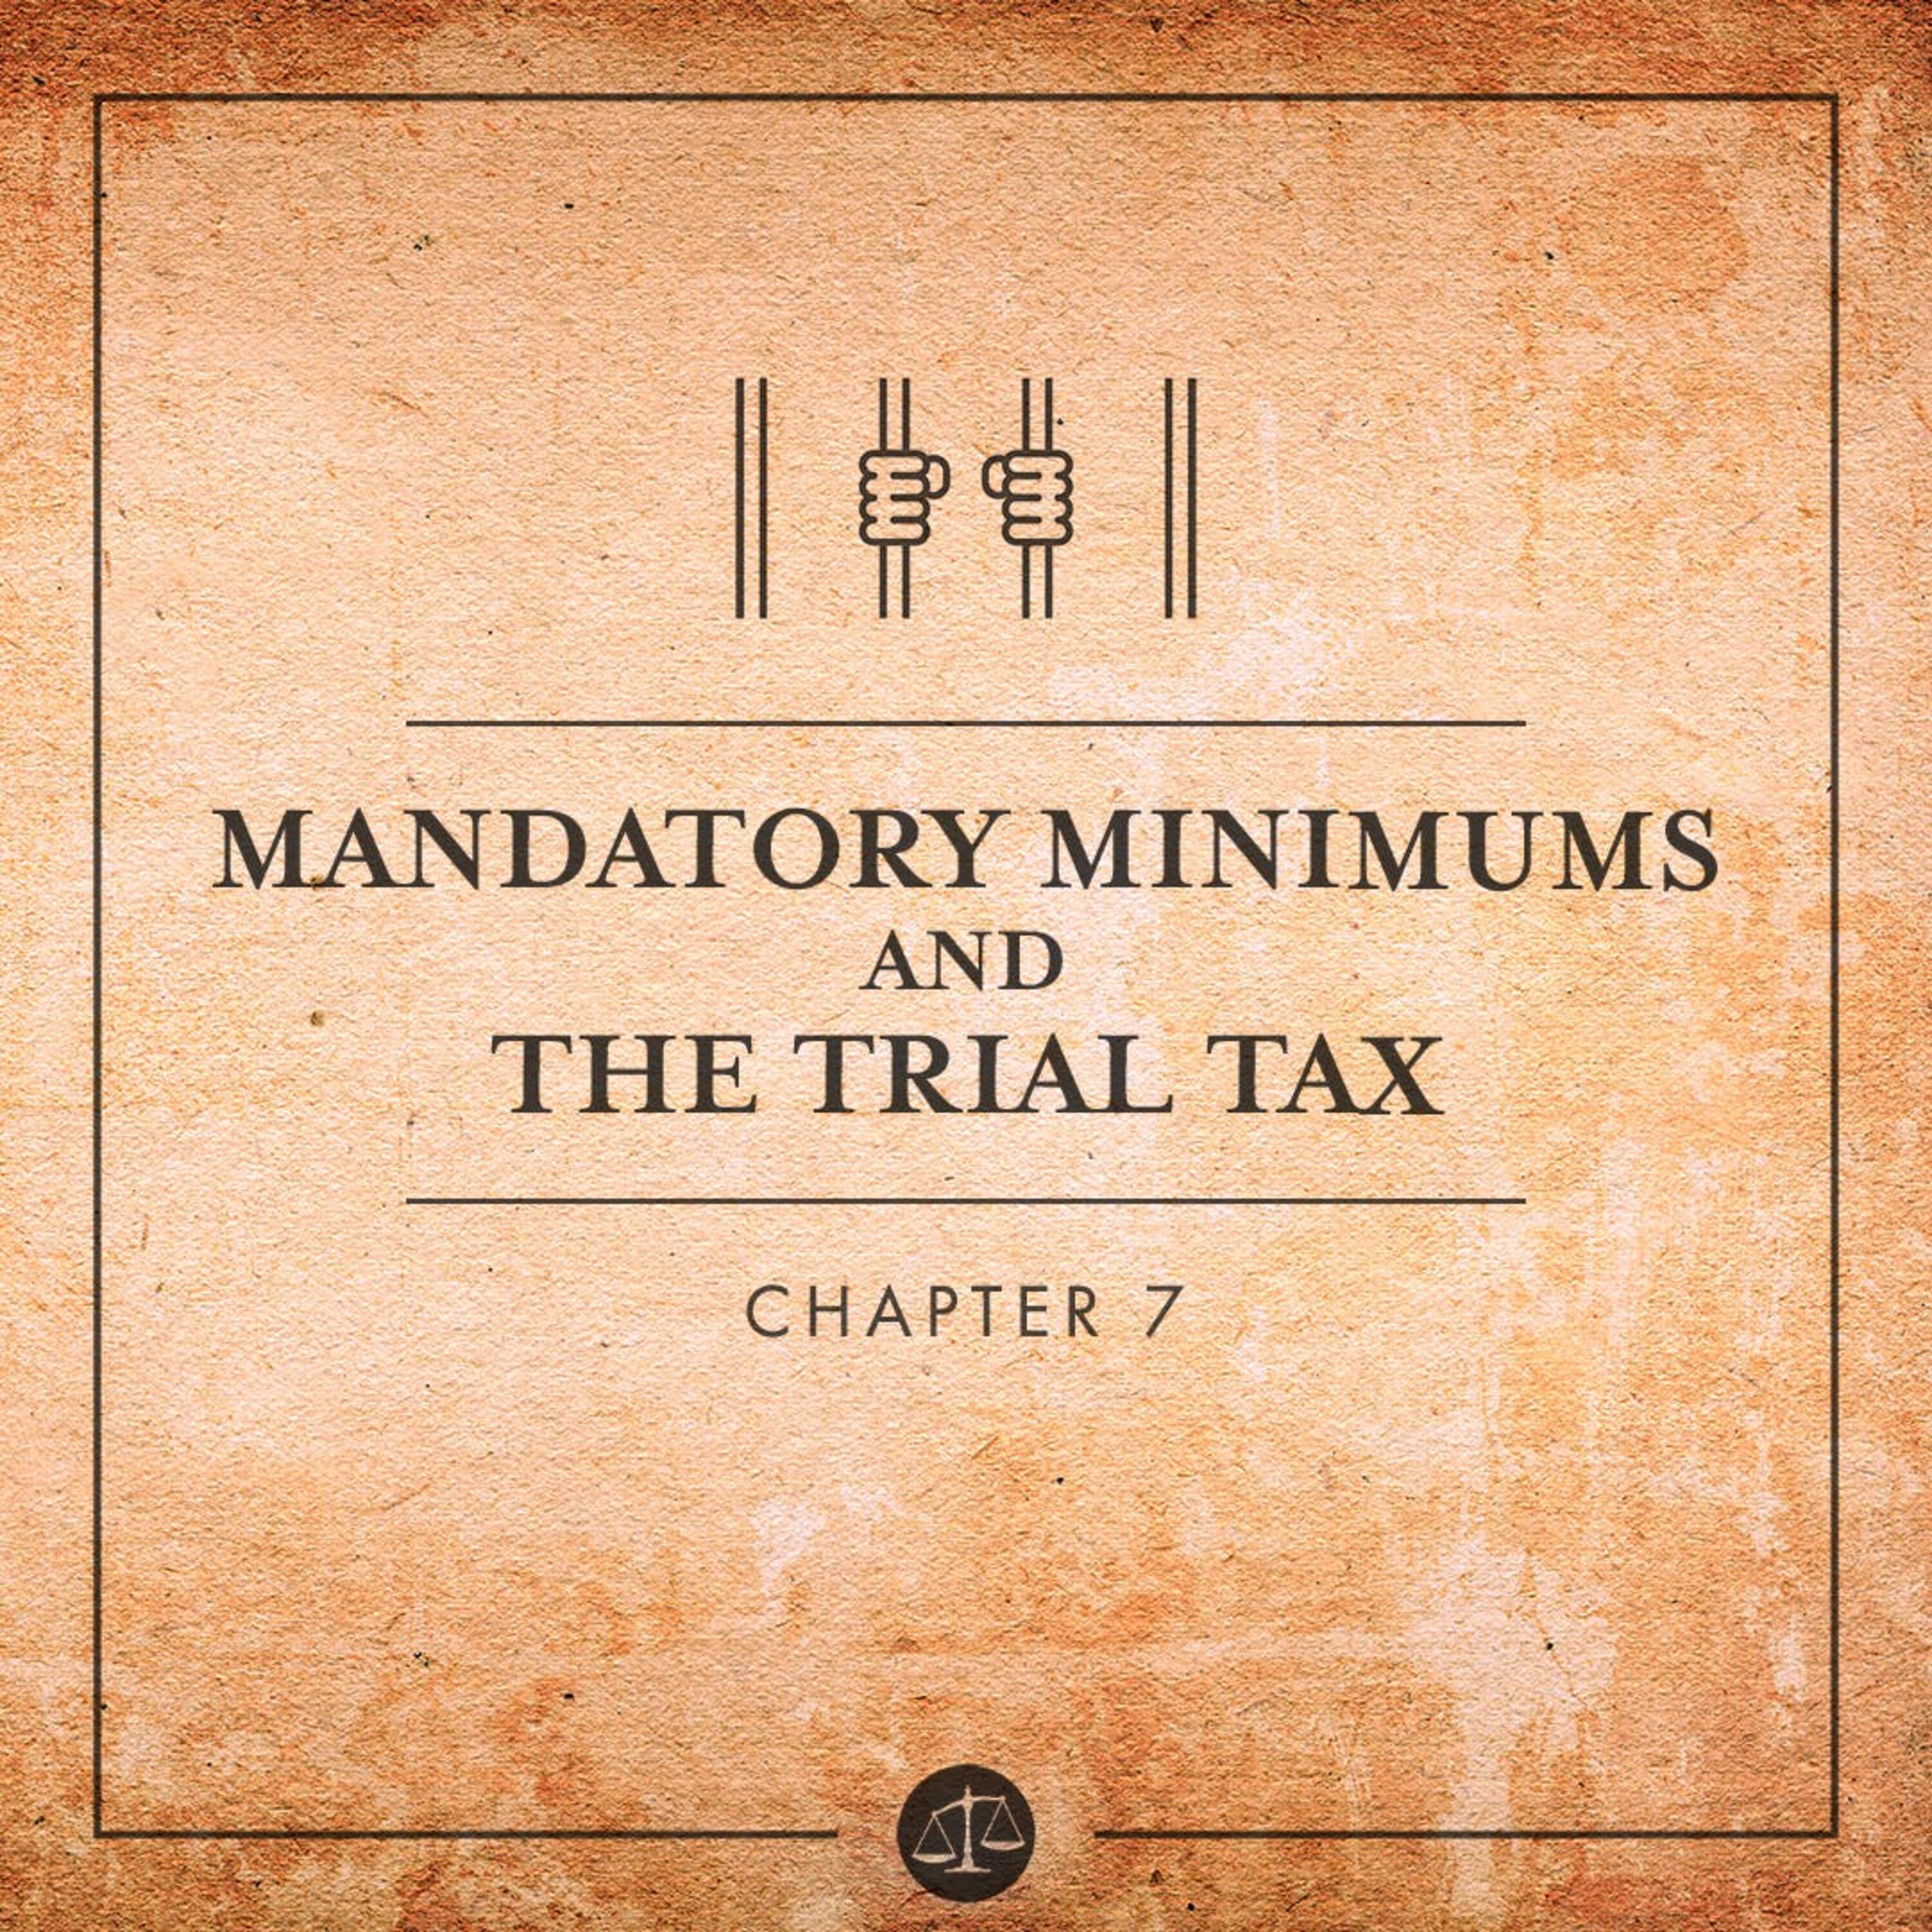 Mandatory Minimums and The Trial Tax